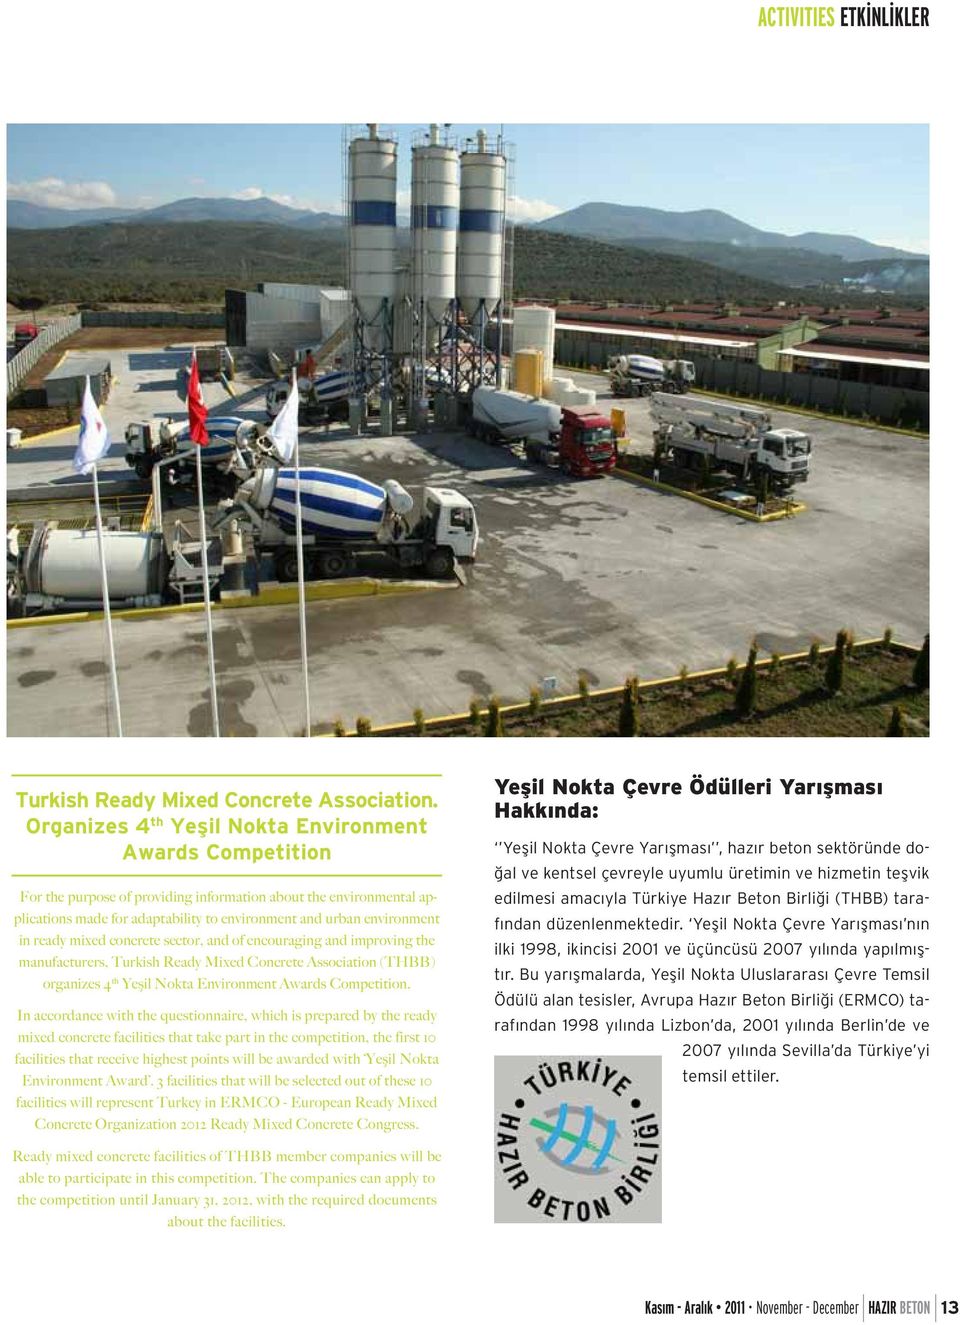 ready mixed concrete sector, and of encouraging and improving the manufacturers, Turkish Ready Mixed Concrete Association (THBB) organizes 4 th Yeşil Nokta Environment Awards Competition.